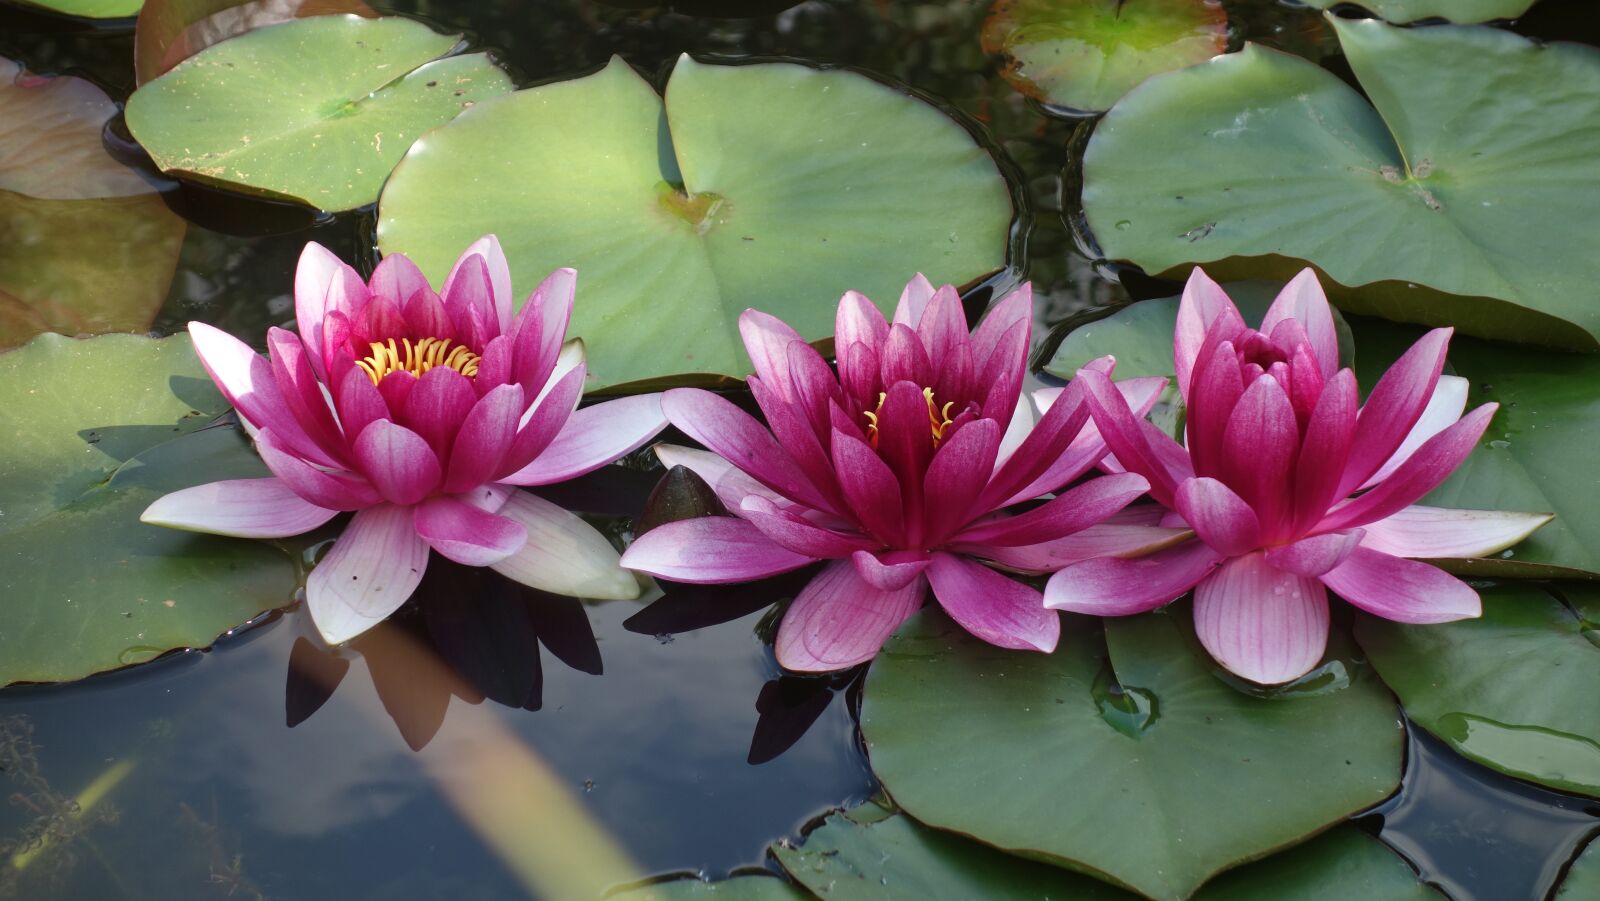 Sony Cyber-shot DSC-RX100 sample photo. Water lily, pond, nature photography